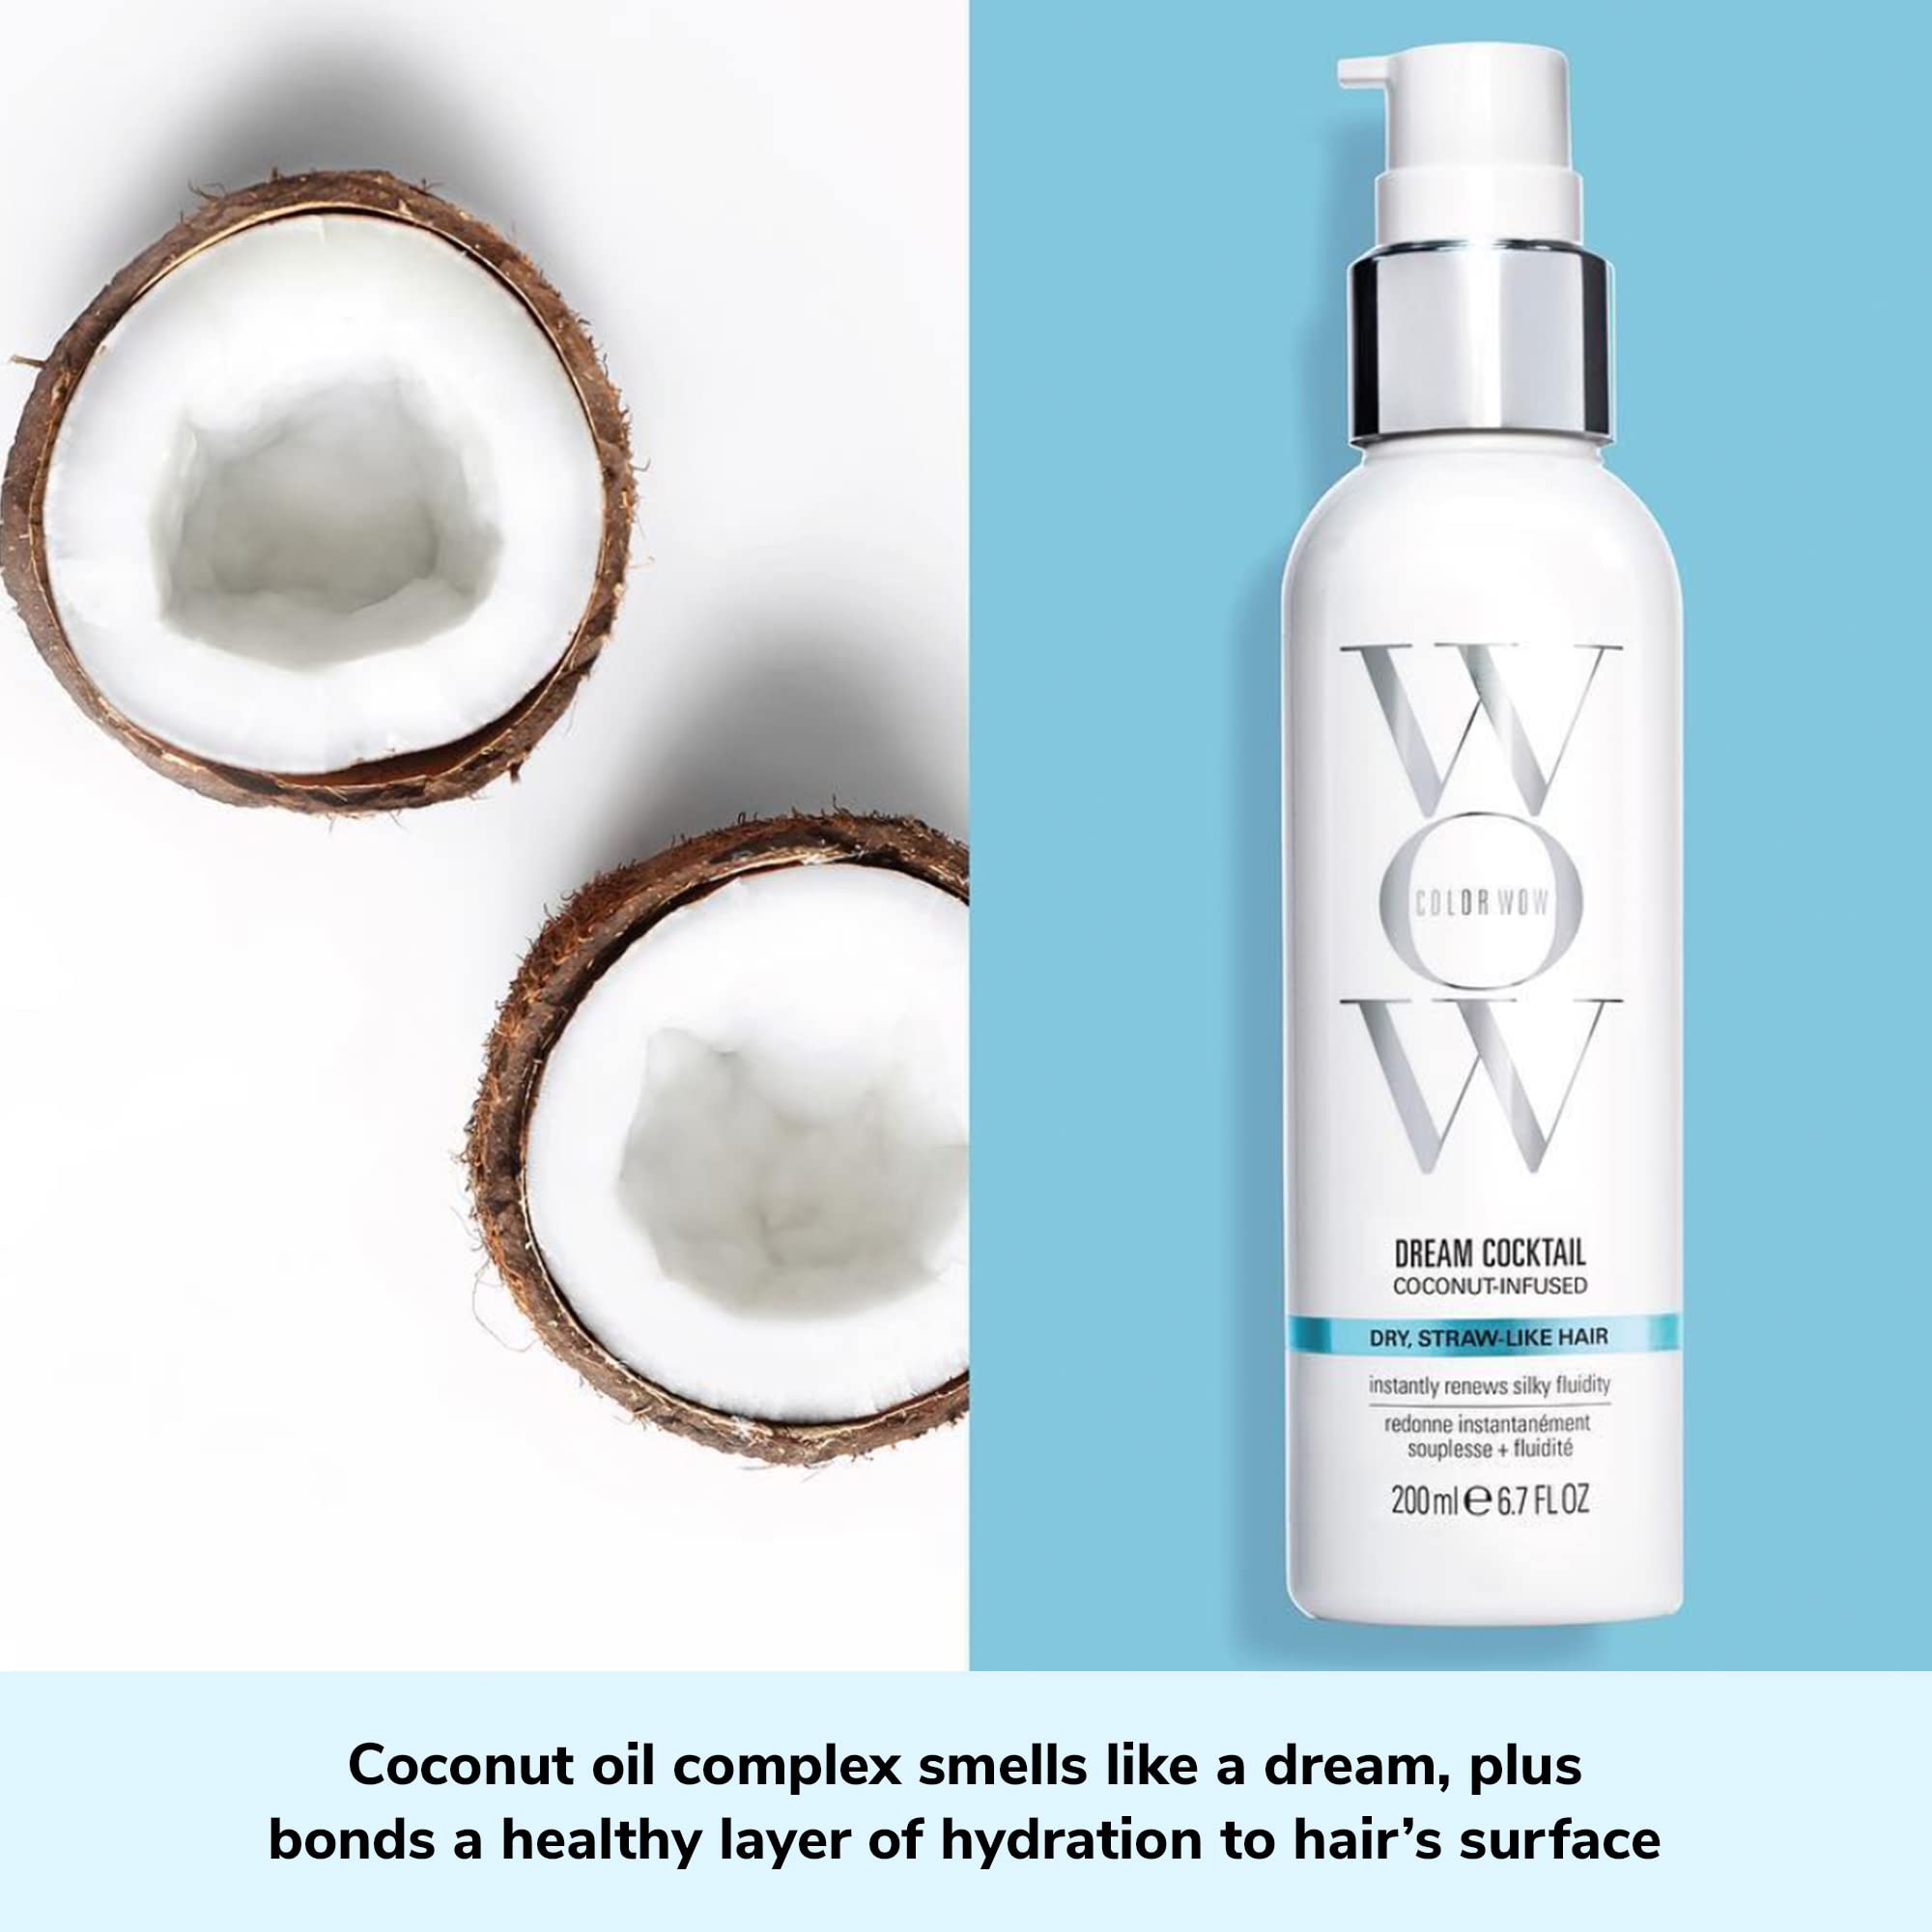 Color Wow Dream Cocktail Coconut Infused – No frizz leave in conditioner turns dry, damaged hair to silk in a single blow dry; Coconut oil complex detangles, silkens; heat protection; closes cuticles